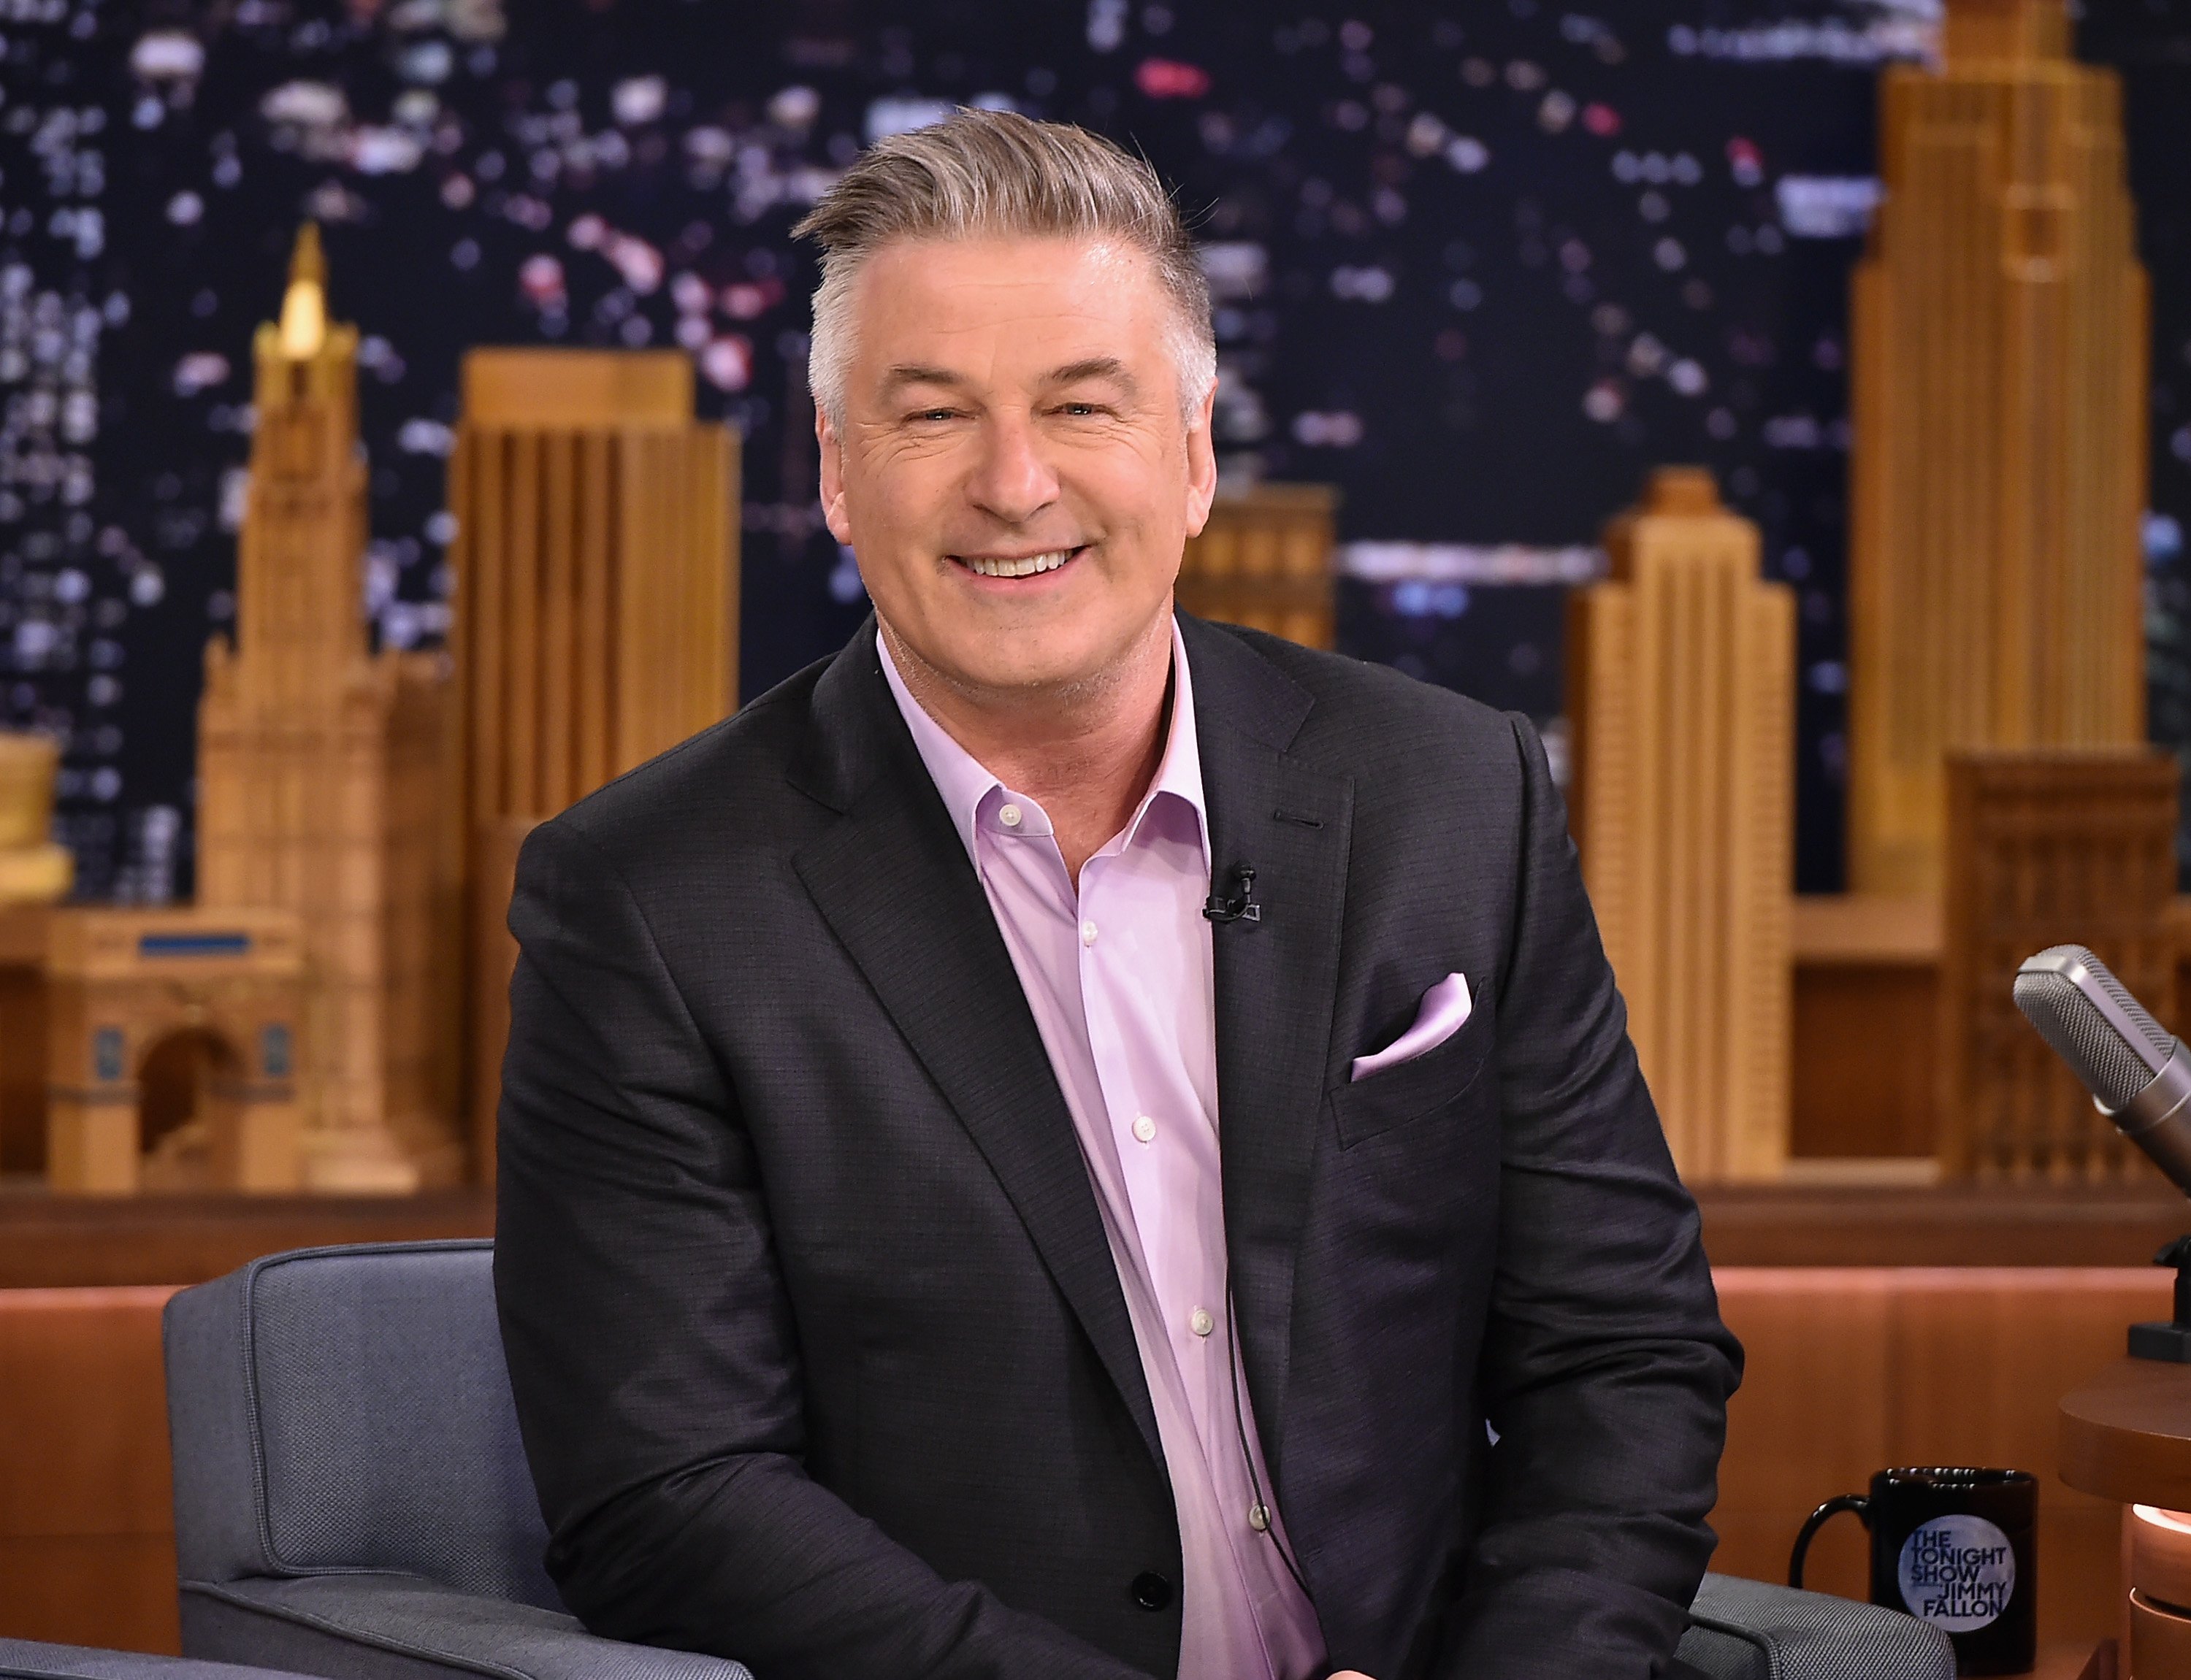 Alec Baldwin Visits "The Tonight Show Starring Jimmy Fallon" at Rockefeller Center on February 9, 2017 in New York City | Photo: Getty Images